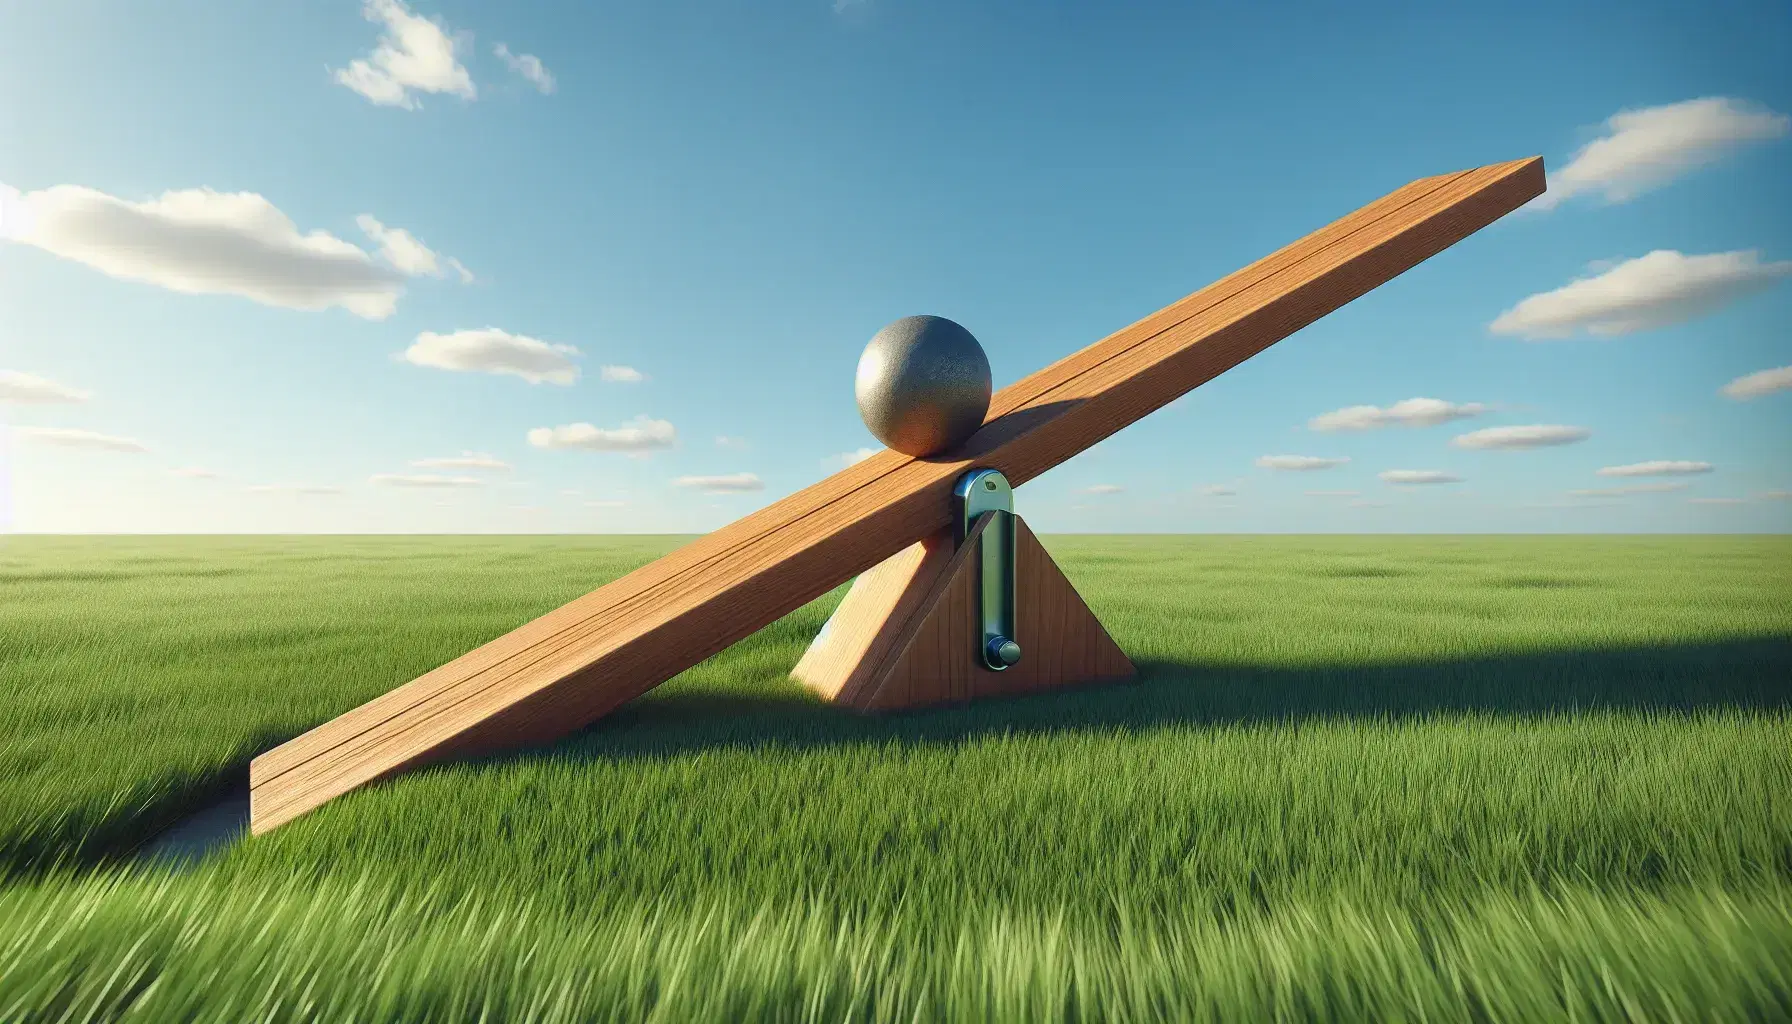 Wooden seesaw with metallic sphere weight on one end, balanced on a triangular fulcrum in a grassy field under a clear blue sky.